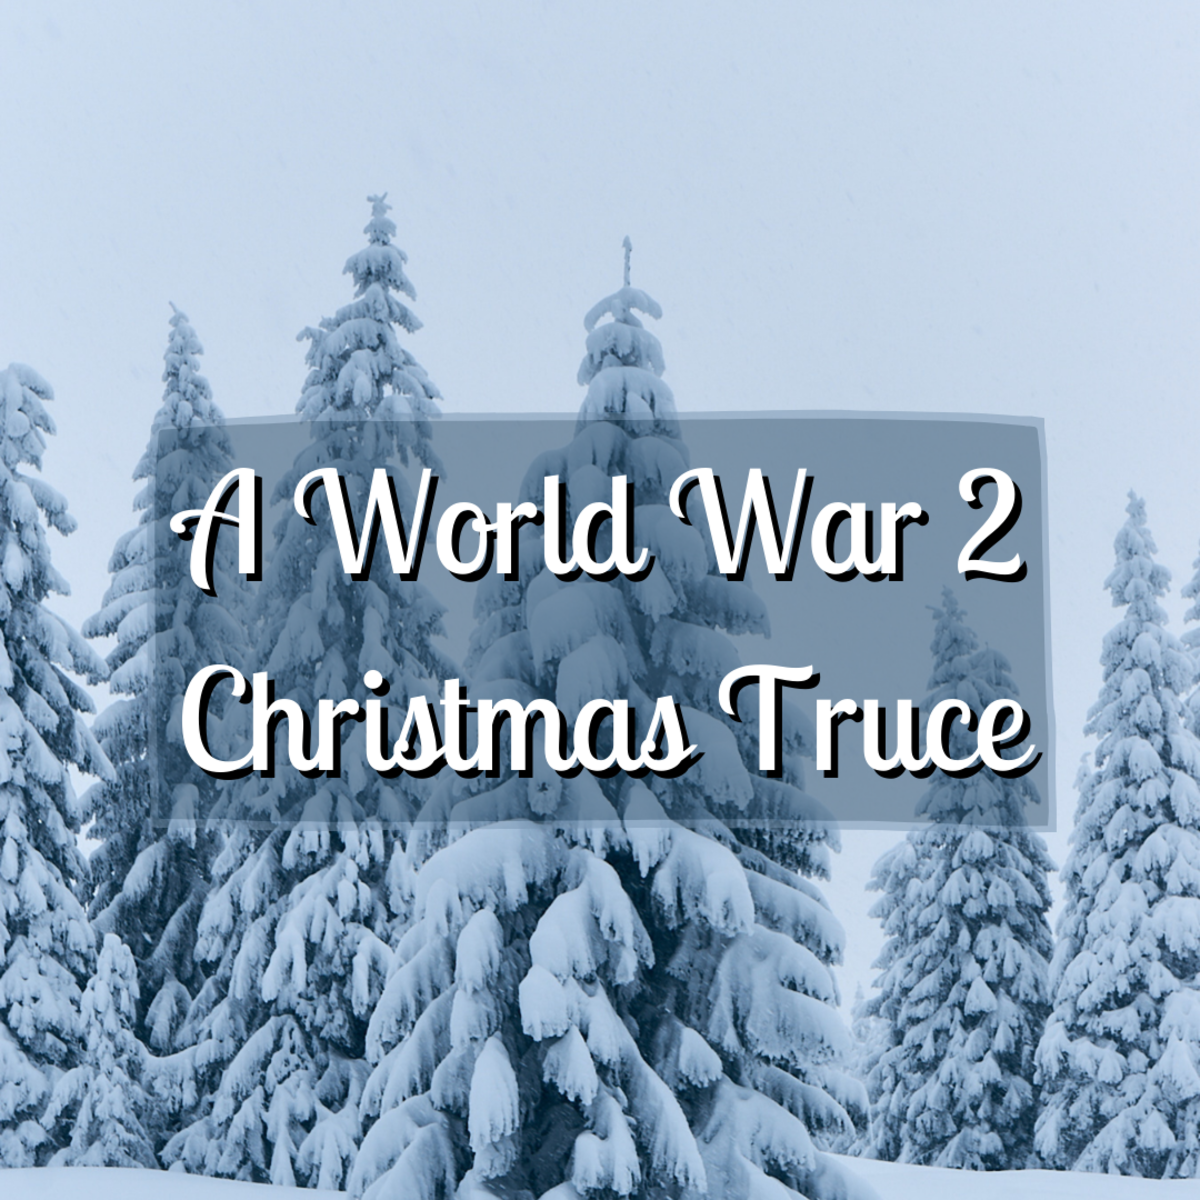 A Small Christmas Truce During World War 2